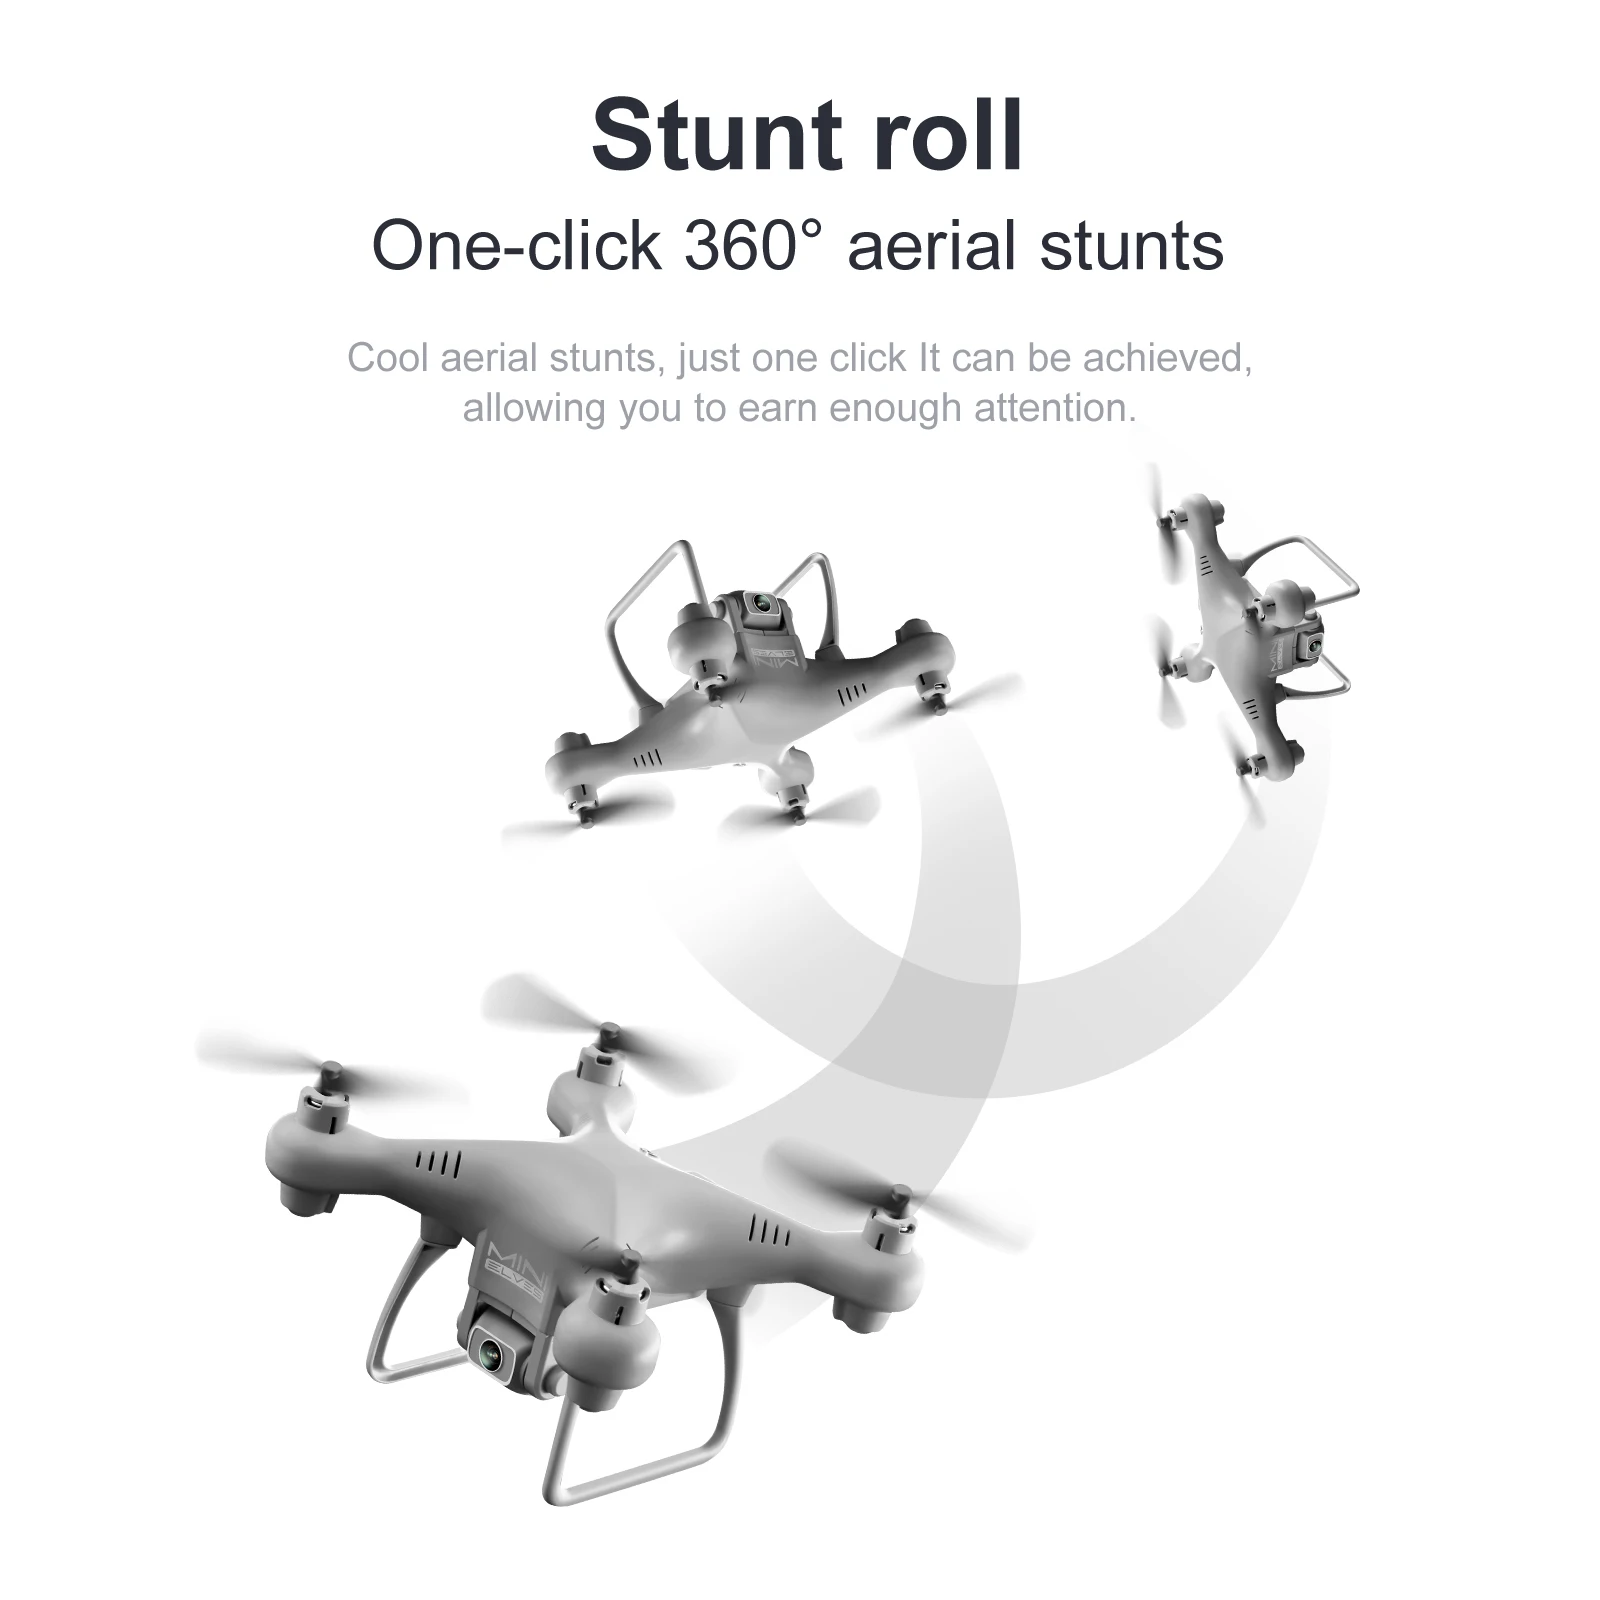 KY908 Mini Drone, stunt roll one-click 3609 aerial stunts, just one click